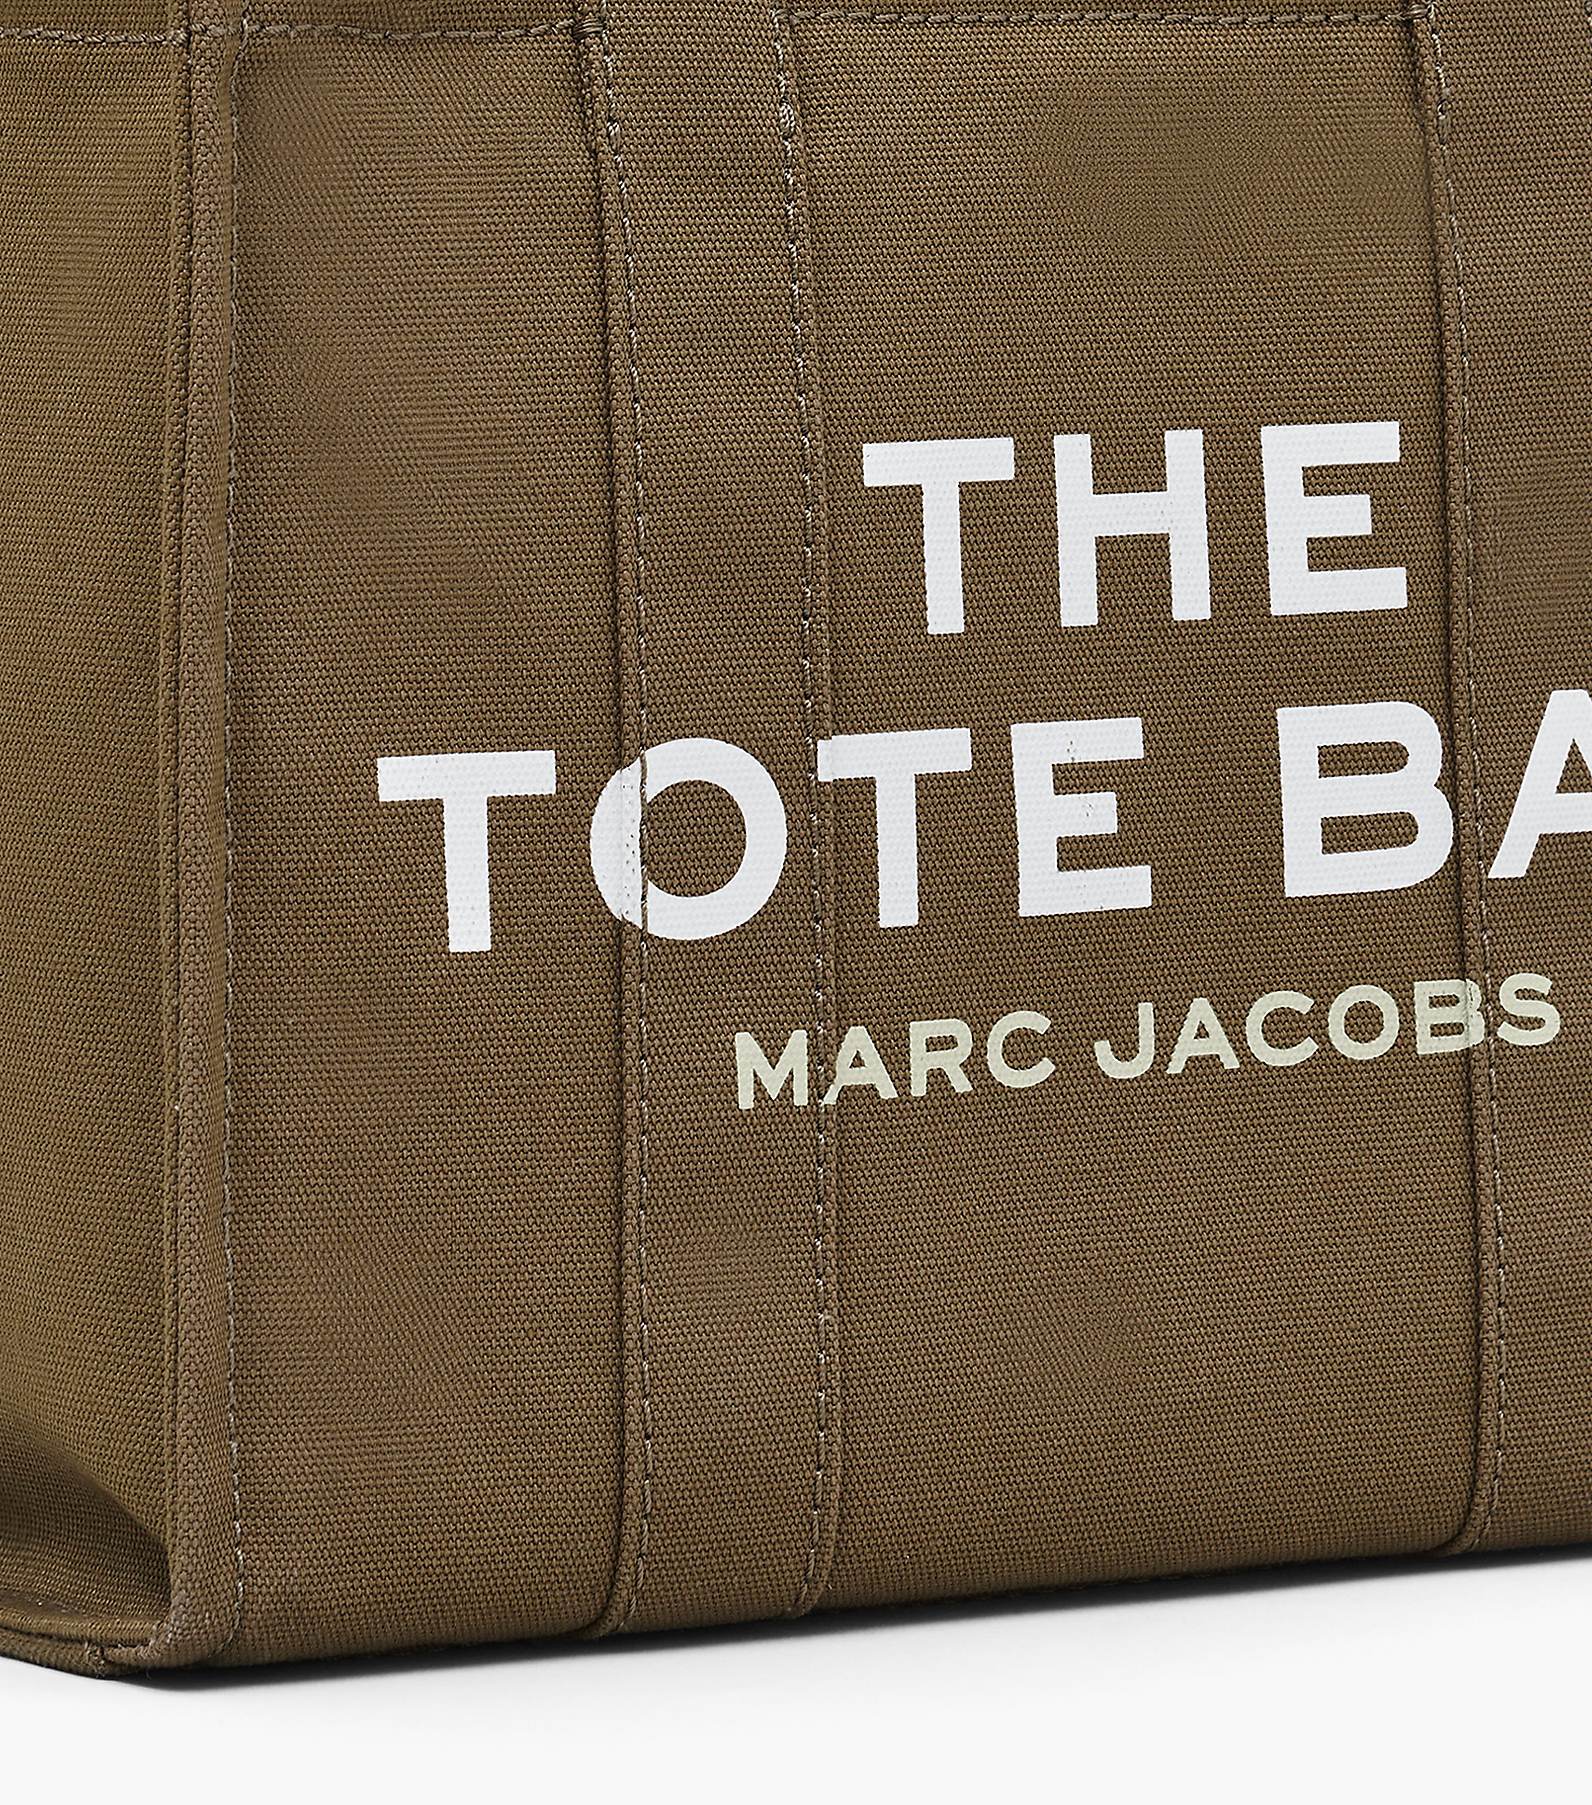 The Medium canvas tote bag in green - Marc Jacobs